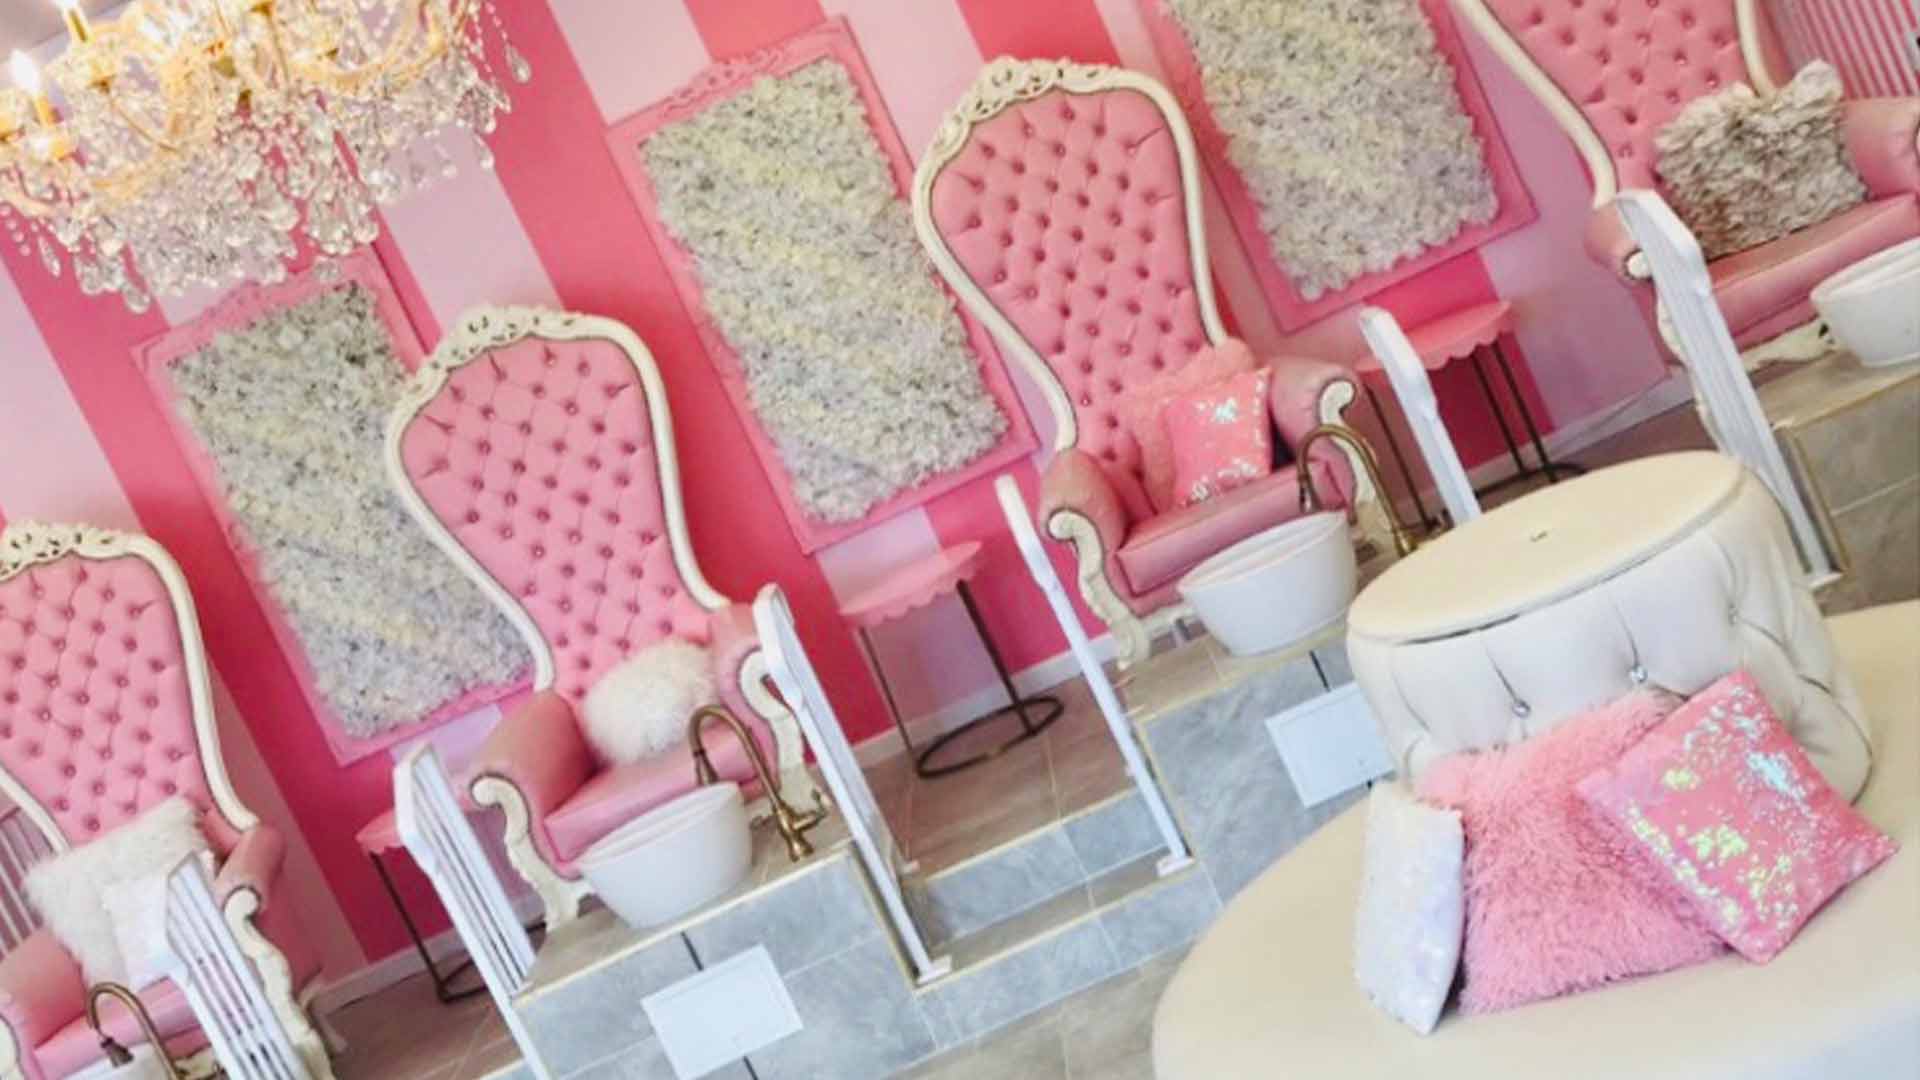 Princess Nails & Beauty | Nail Salon in Hammersmith and Fulham, London -  Treatwell